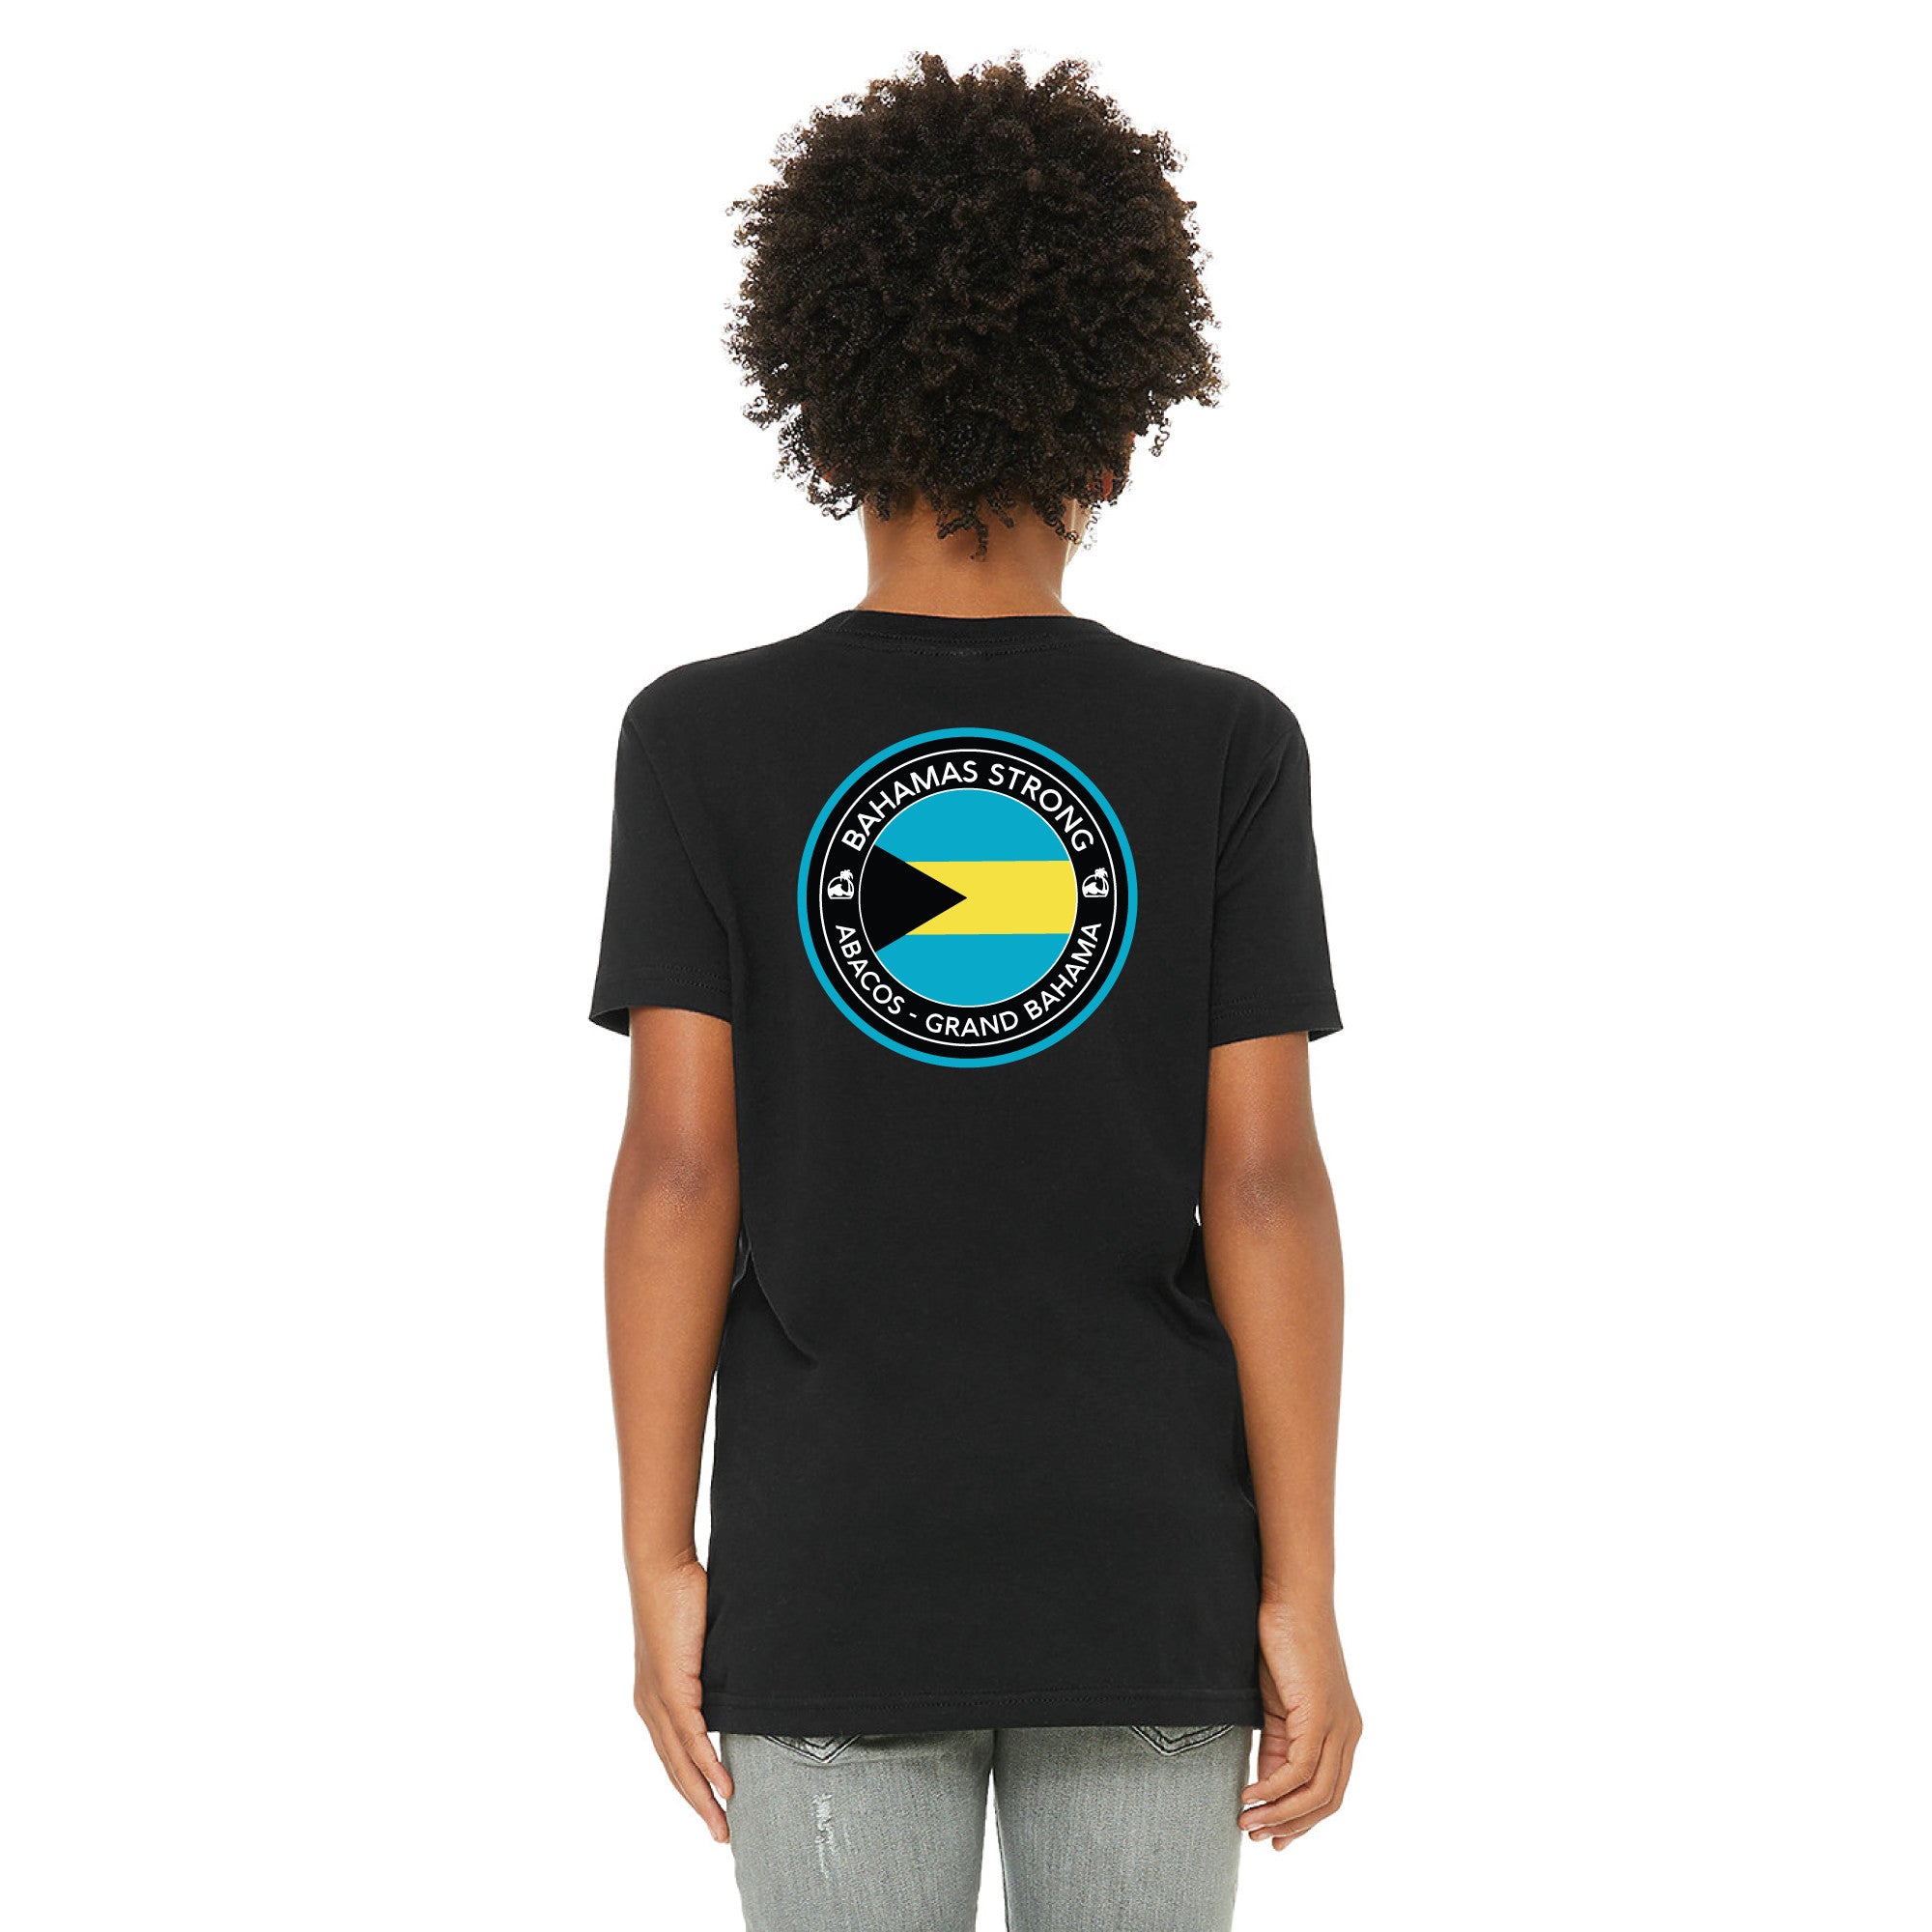 Island Water Sports Bahamas Strong Tee Black S/S Youth S (6-8)